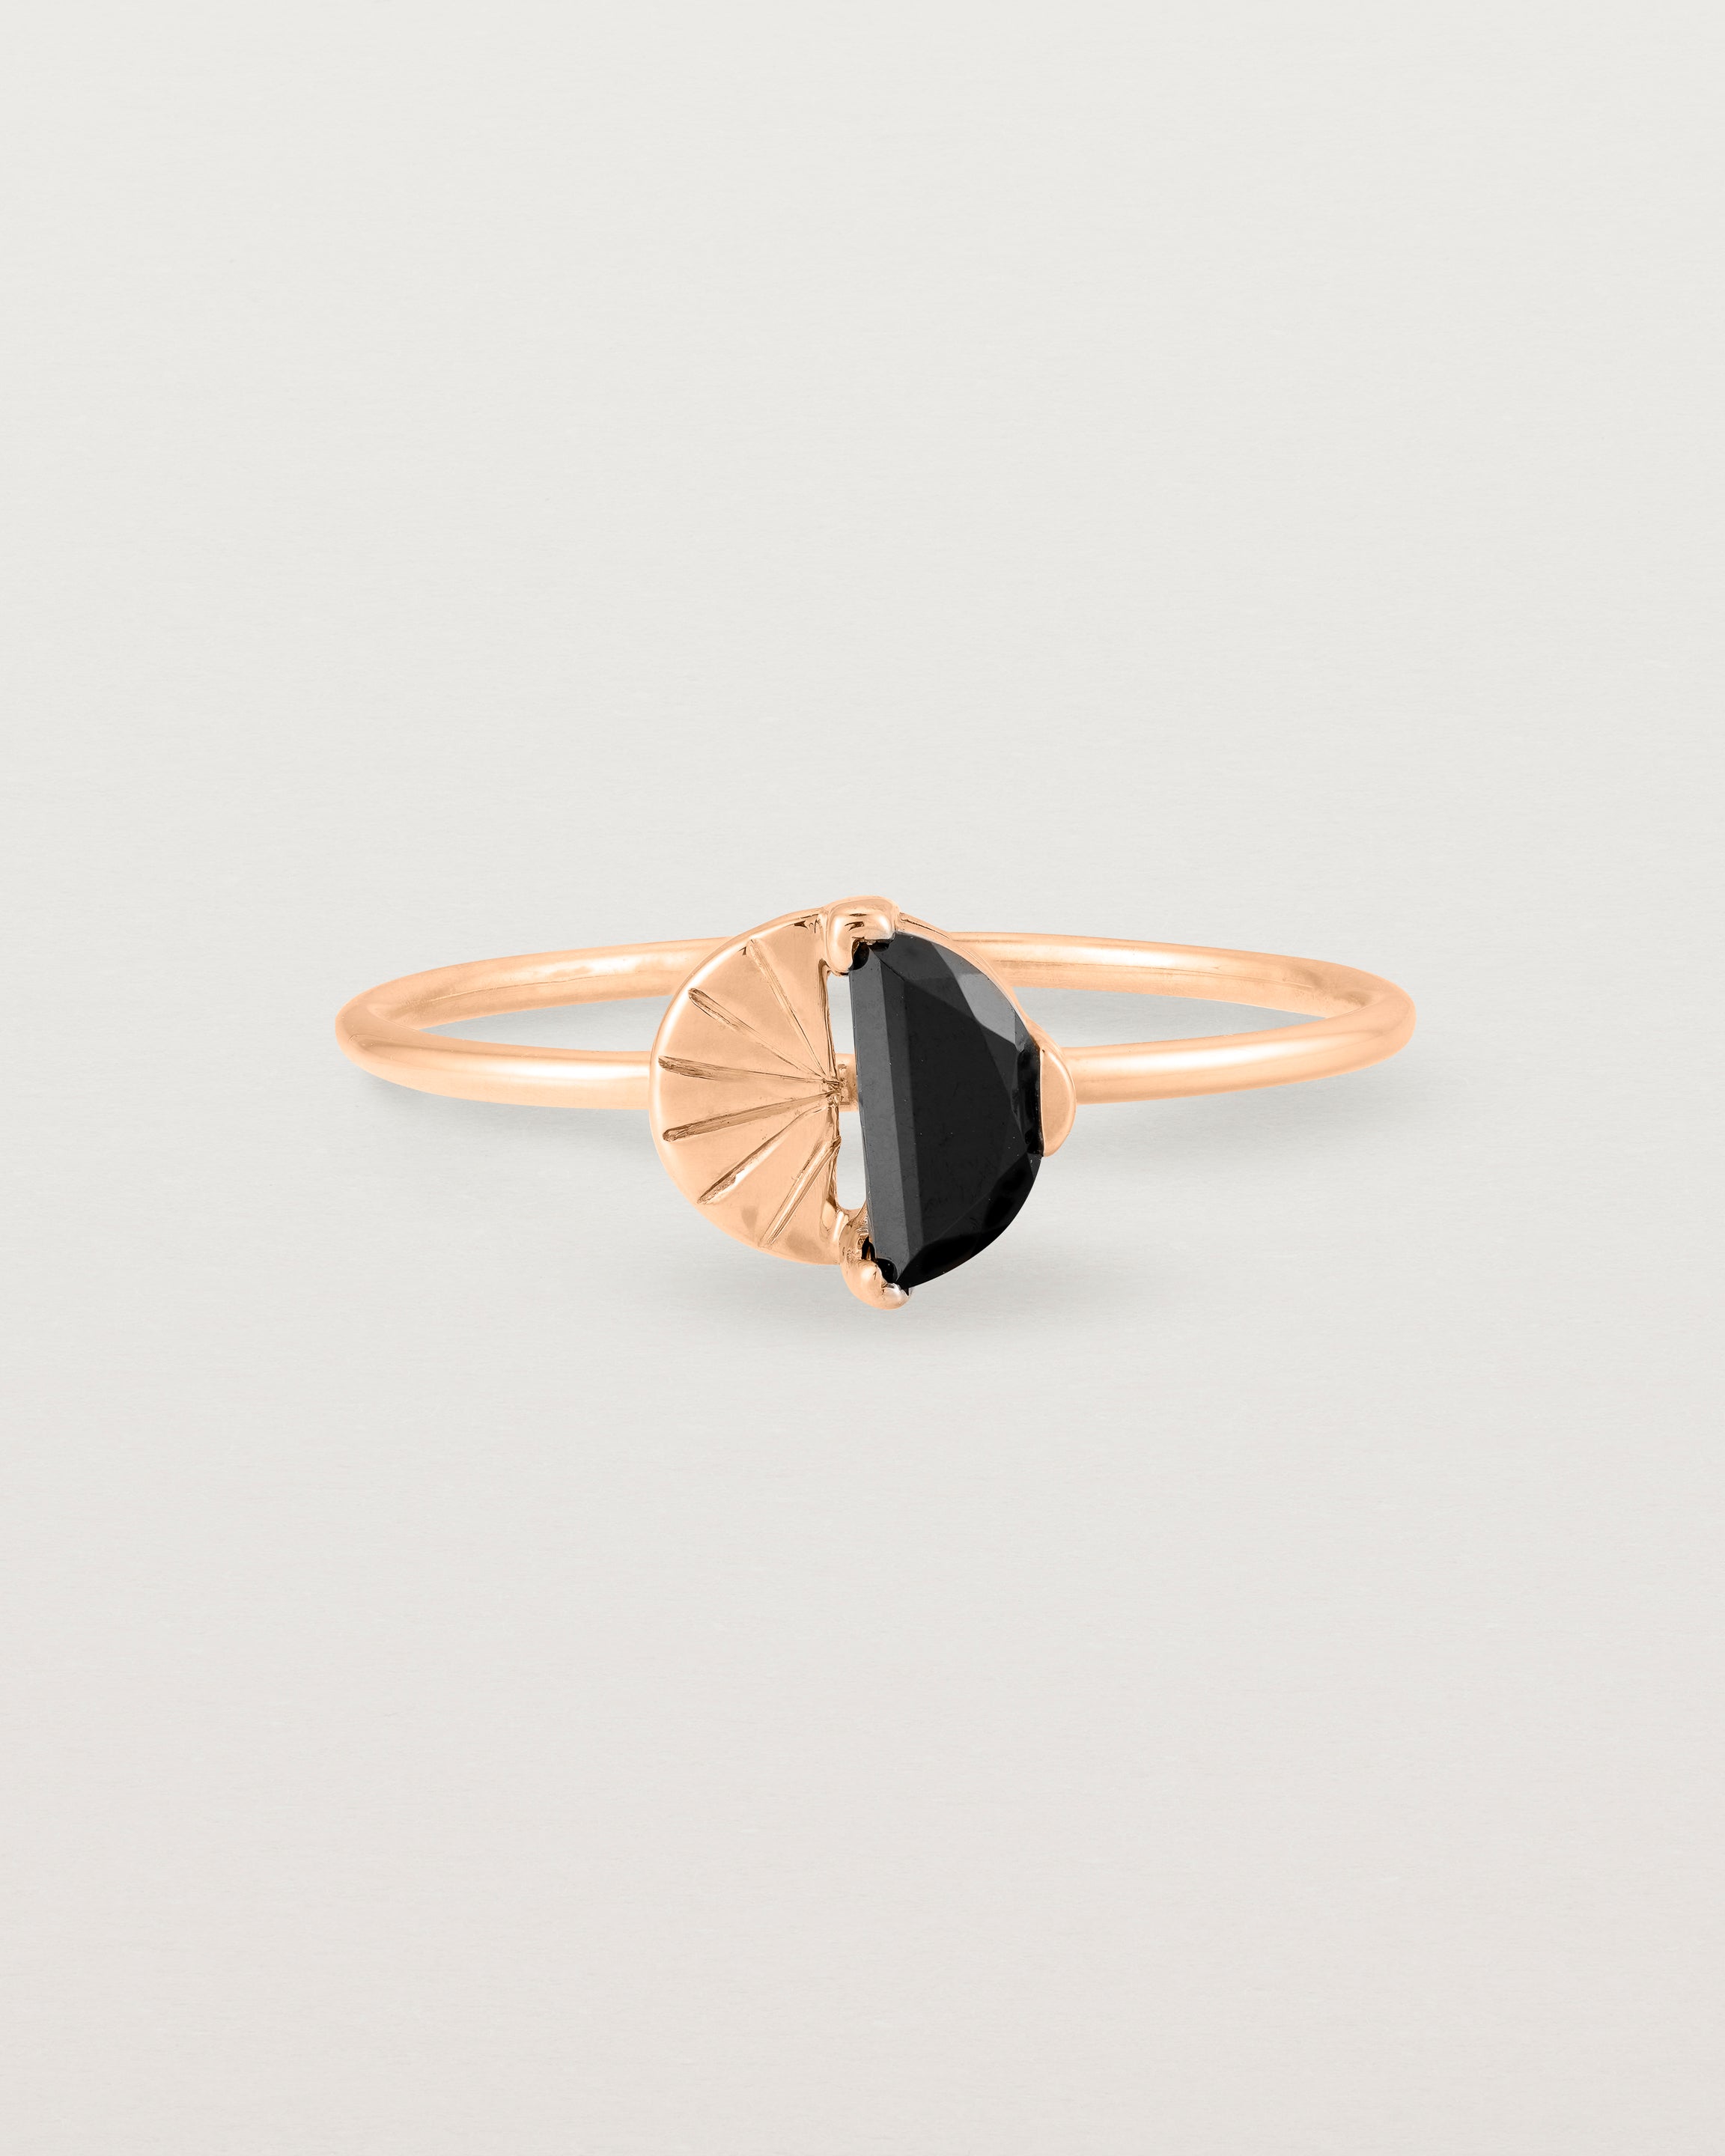 Front view of the Jia Stone Ring | Black Spinel in Rose Gold.